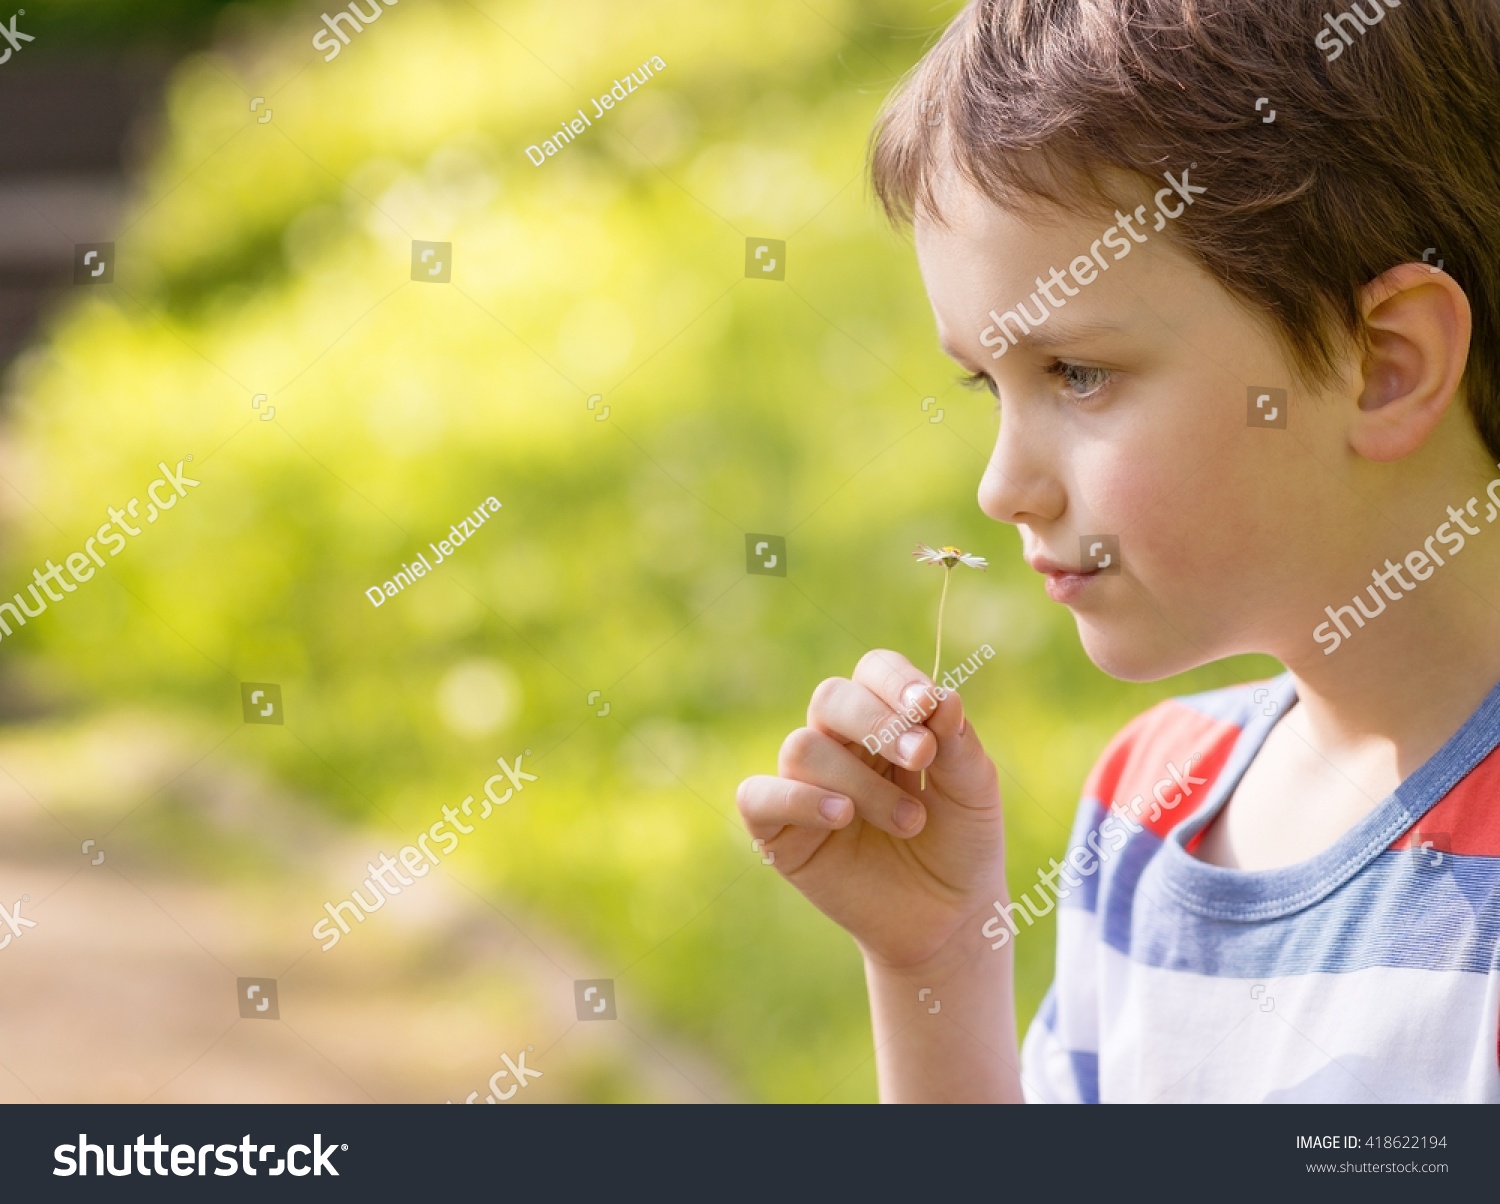 Save to a lightbox - stock-photo-children-s-day-sweet-little-boy-smelling-a-daisy-in-the-park-418622194